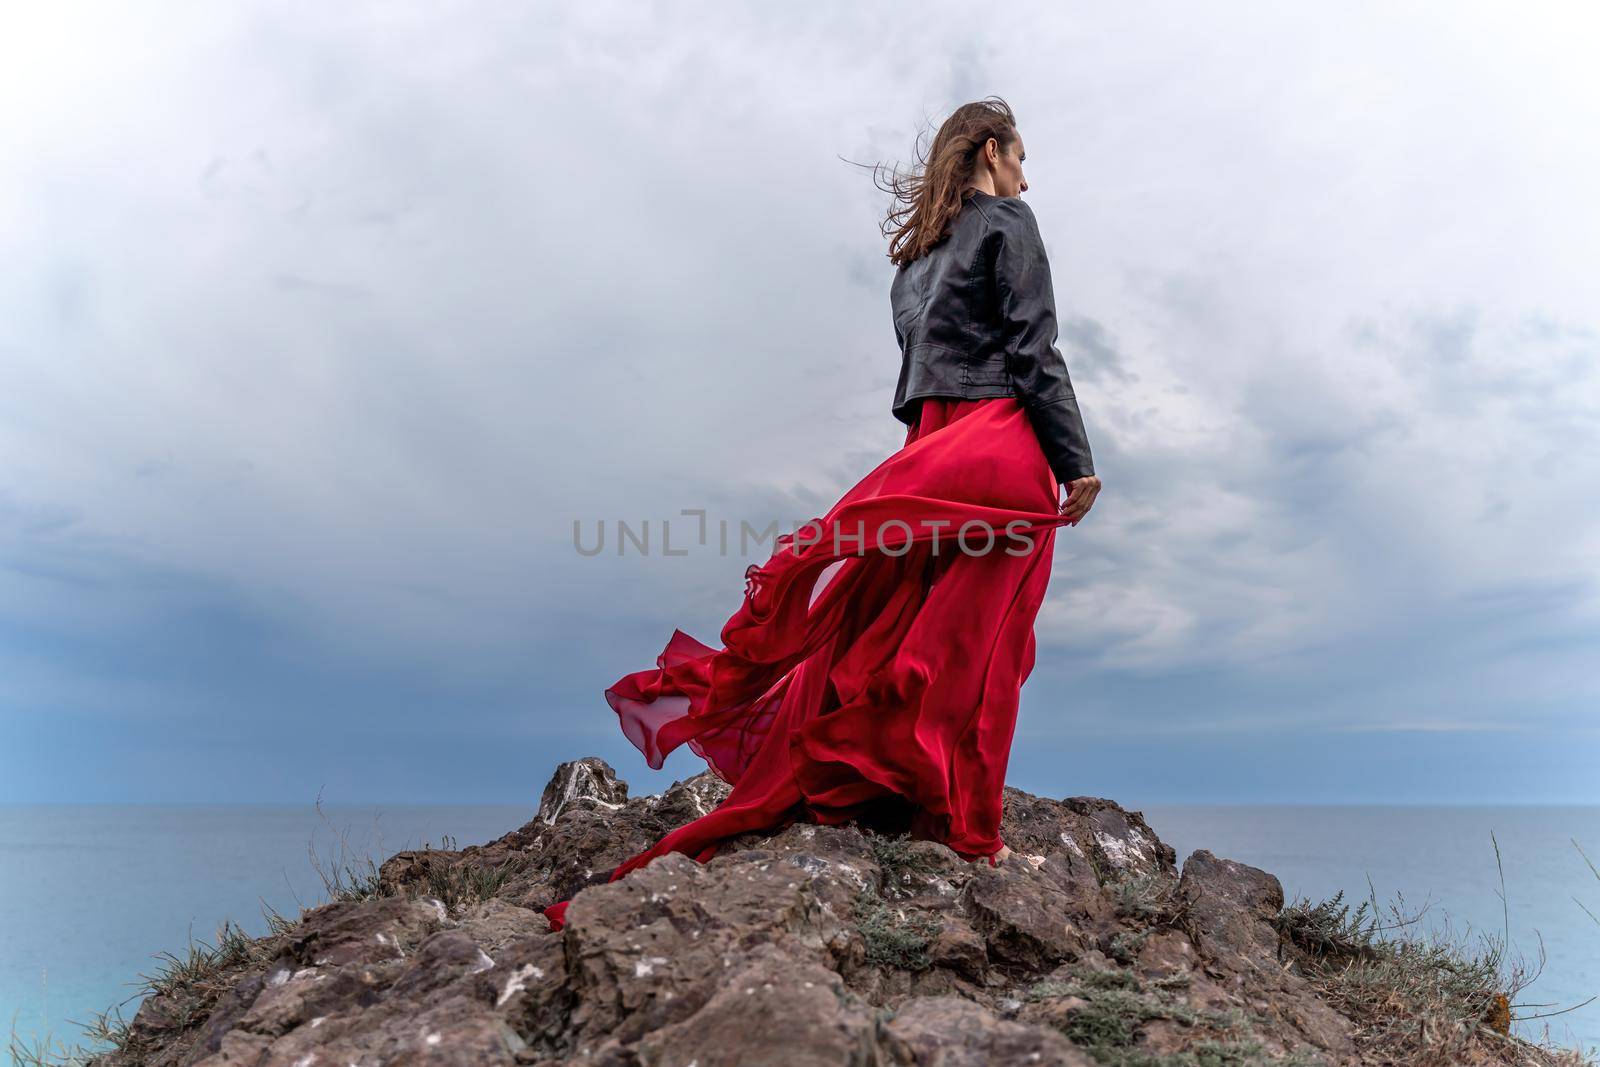 A woman in a red dress and leather jacket stands above a stormy sky, her dress fluttering, the fabric flying in the wind